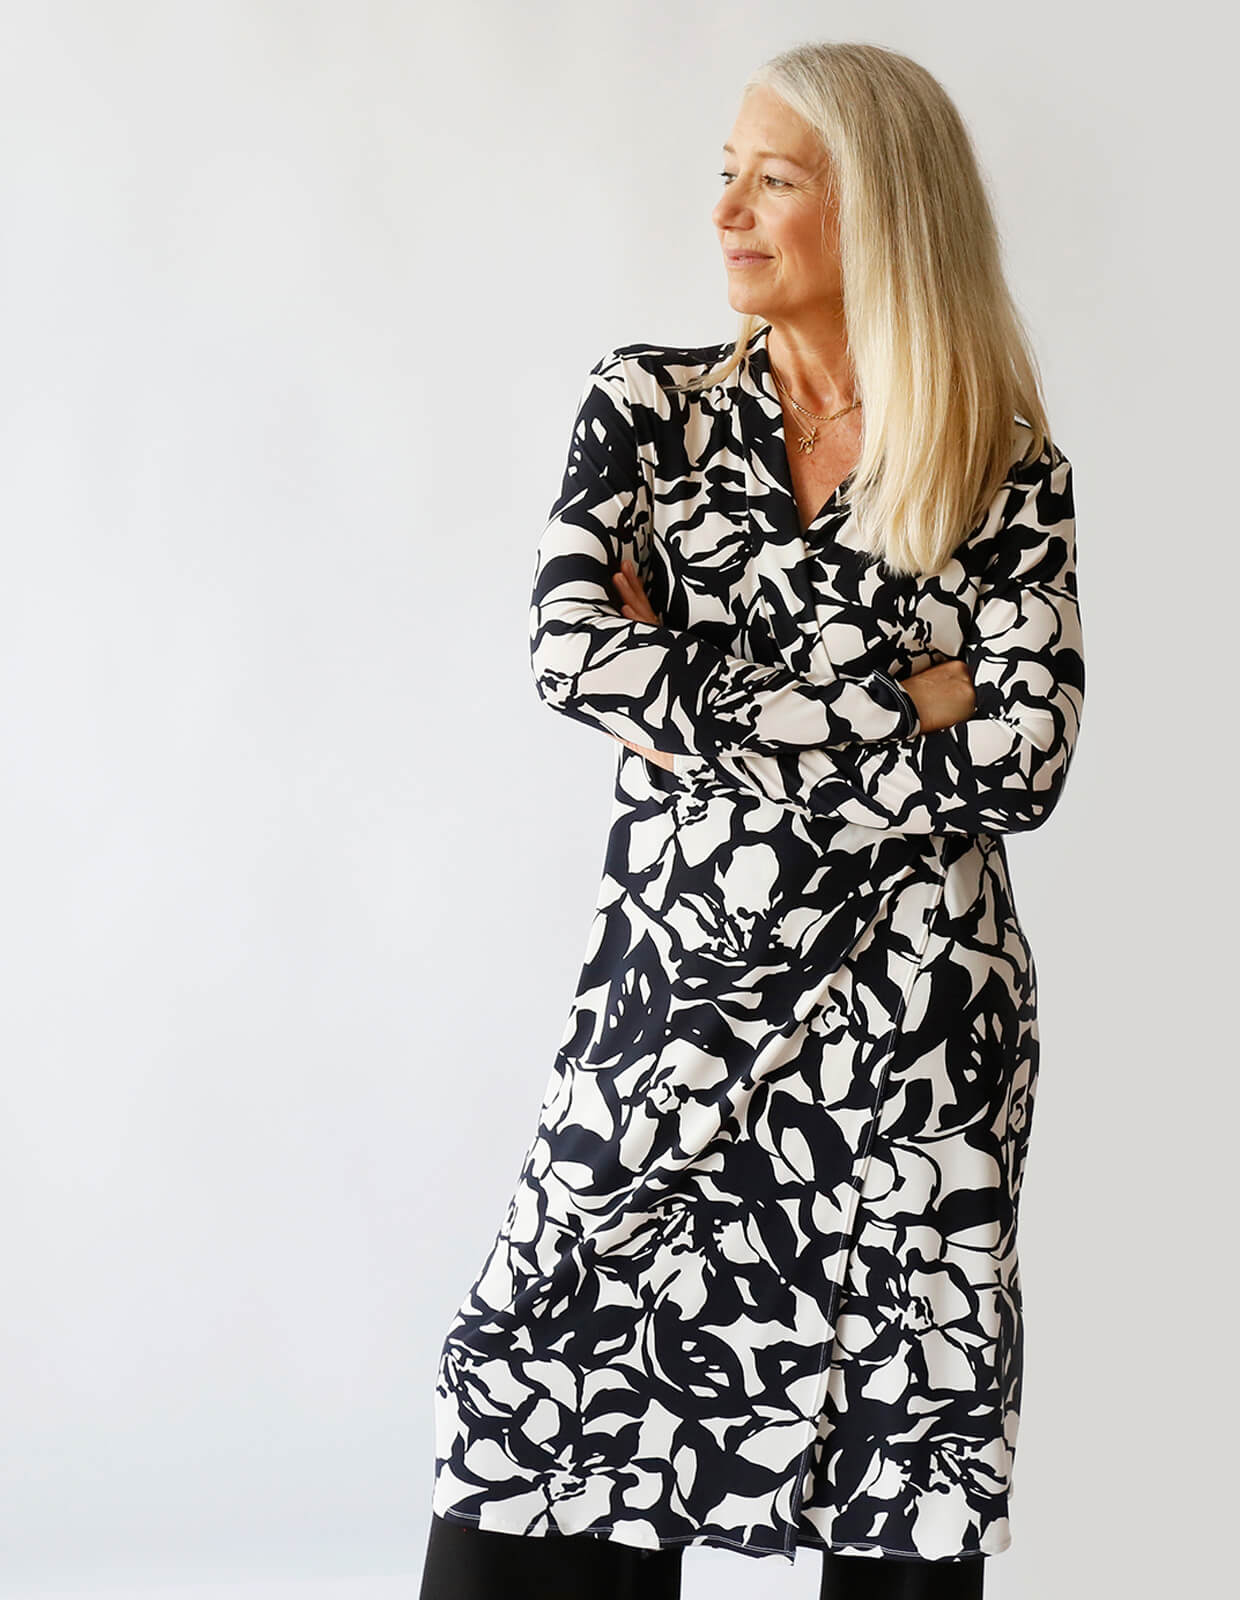 Woman wearing the Wrap Dress sewing pattern from The Maker's Atelier on The Fold Line. A wrap dress pattern made in fluid single jersey fabrics with lycra/elastane content, featuring a V-neck, overlong sleeves, tie waist closure and midi length.